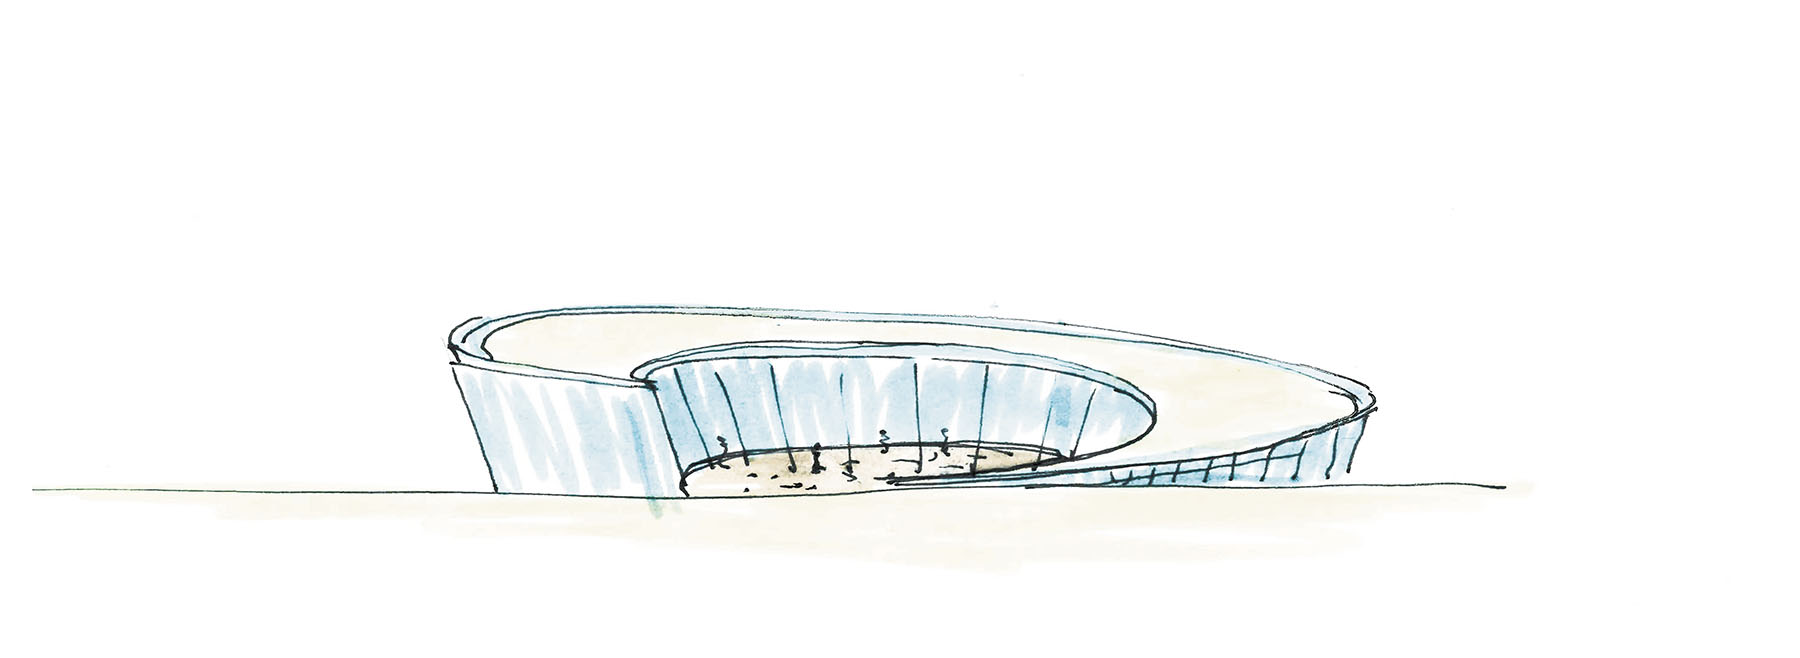 Artist&#39;s sketch of& new performing arts studio building for the Fisher Center at Bard, designed by Maya Lin& in partnership with architects Bialosky and Partners and theater and acoustic consultants Charcoalblue. Photo credit:& Maya Lin Studio with Bialosky New York & | Courtesy of Maya Lin Studio &copy; 2022& 